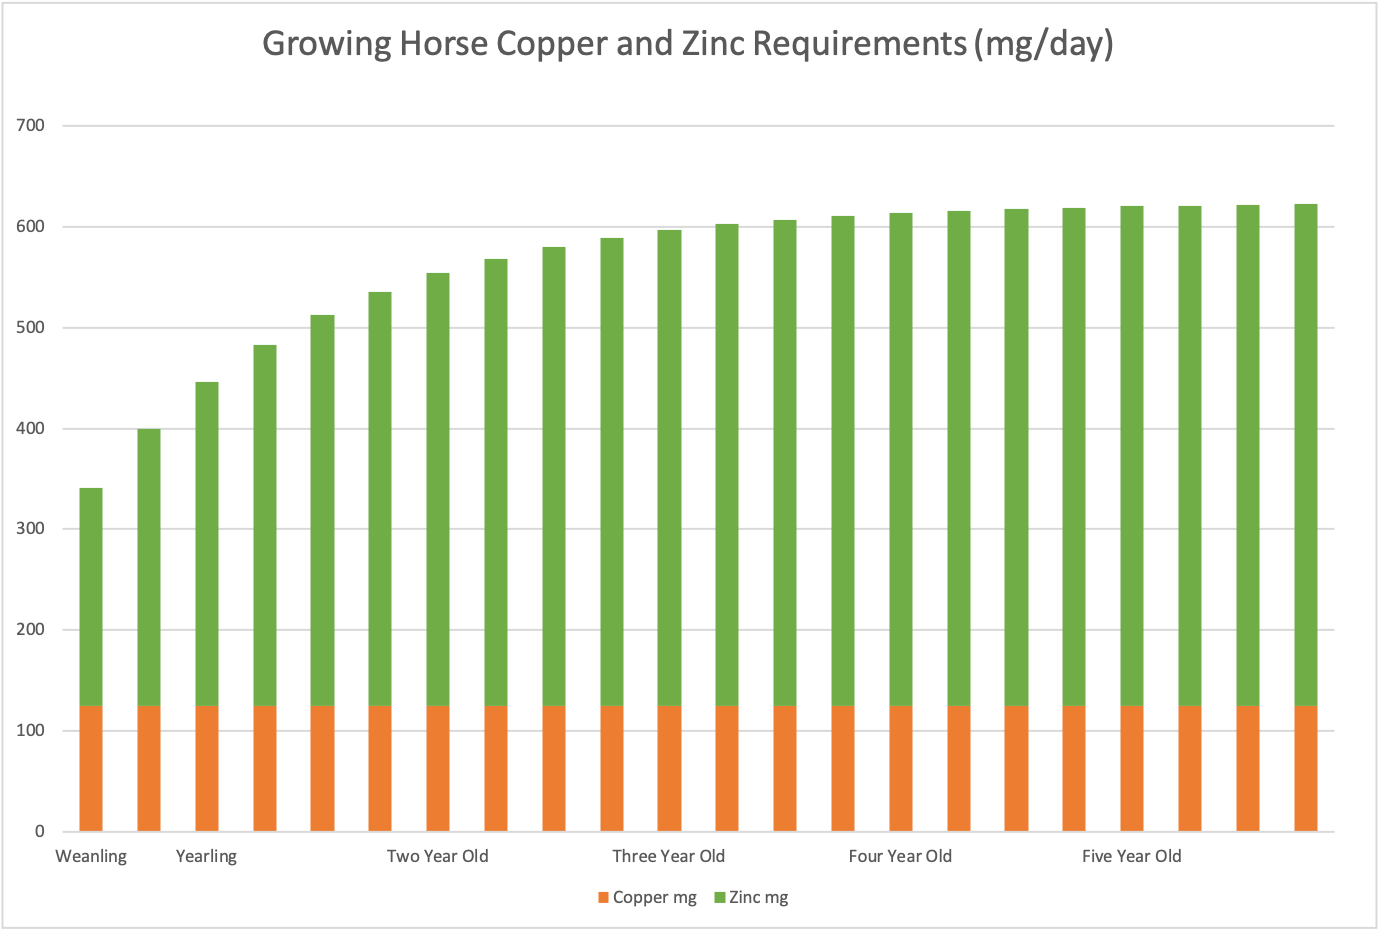 Growing horse copper and zinc requirements